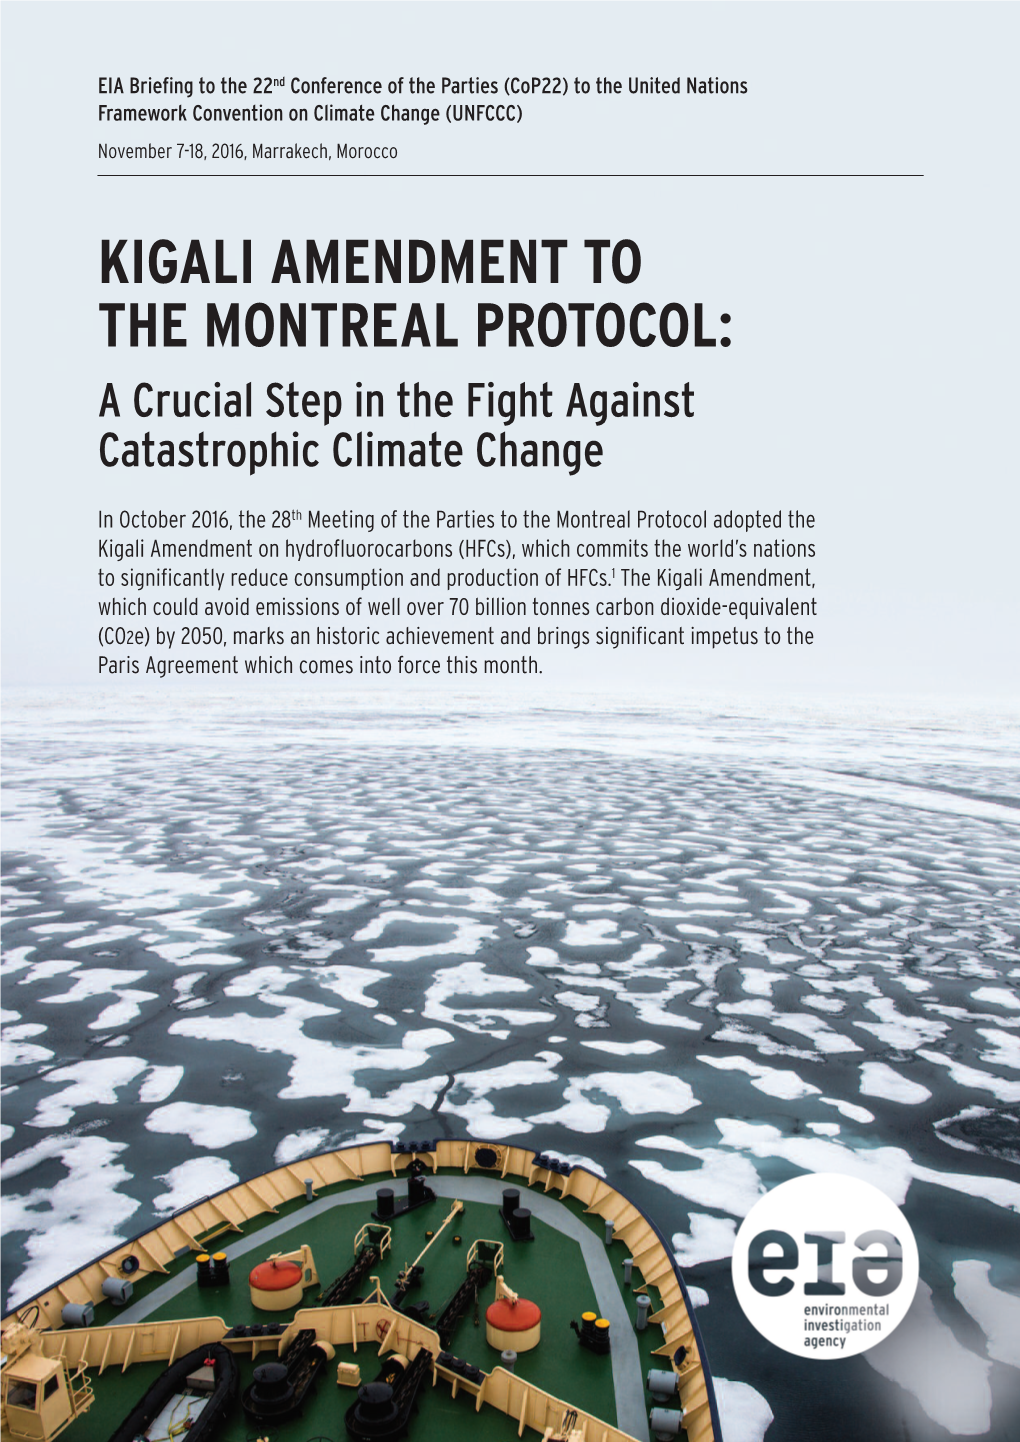 Kigali Amendment to the Montreal Protocol: a Crucial Step in the Fight Against Catastrophic Climate Change